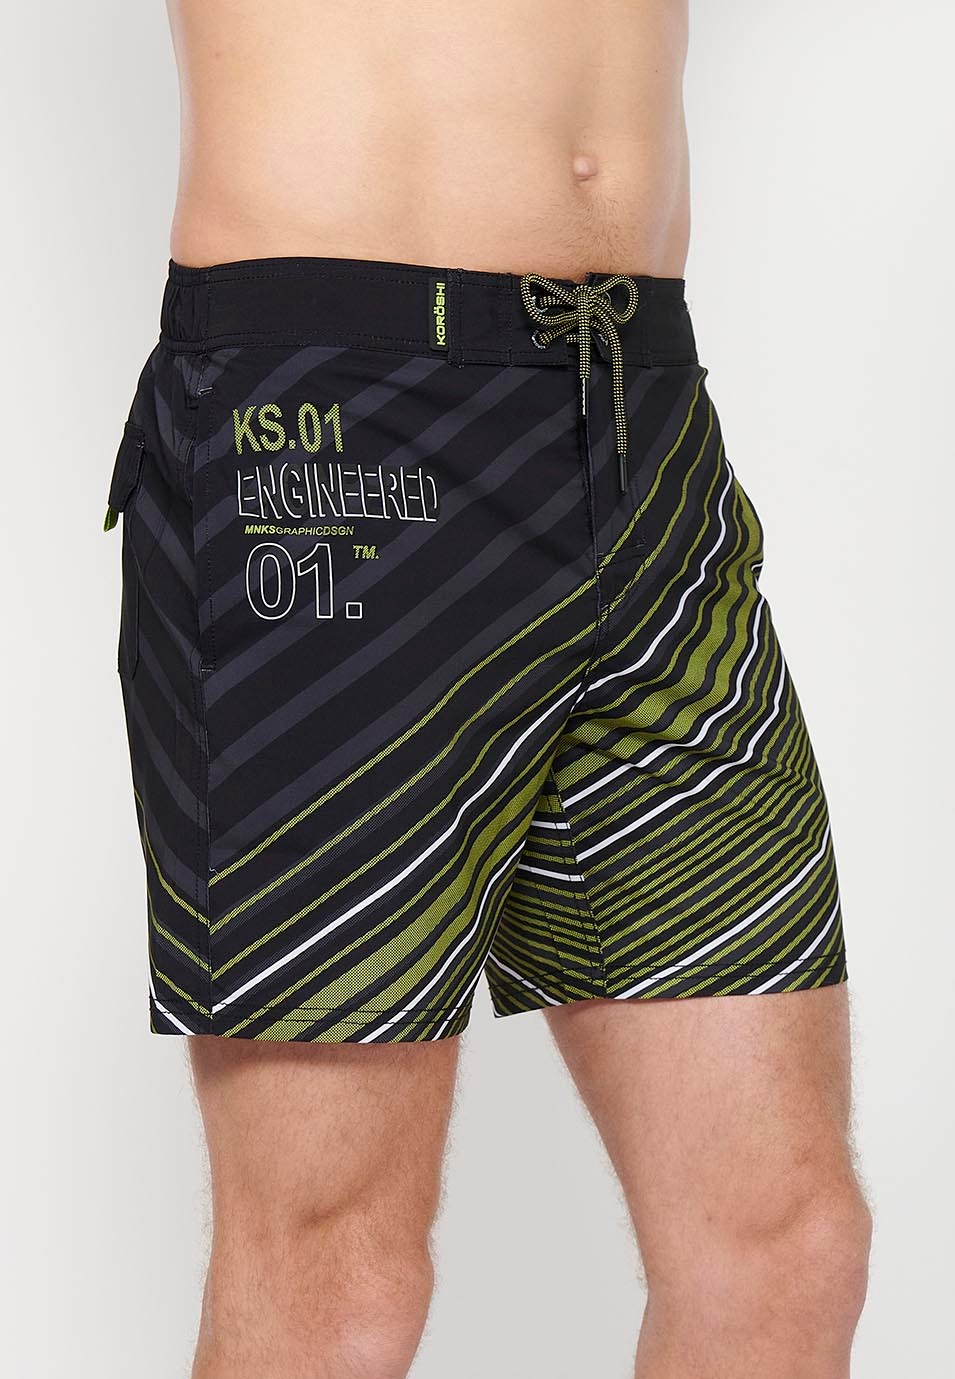 Printed short swimsuit with adjustable waist with drawstring and back pocket and one interior pocket in Lime Color for Men 5